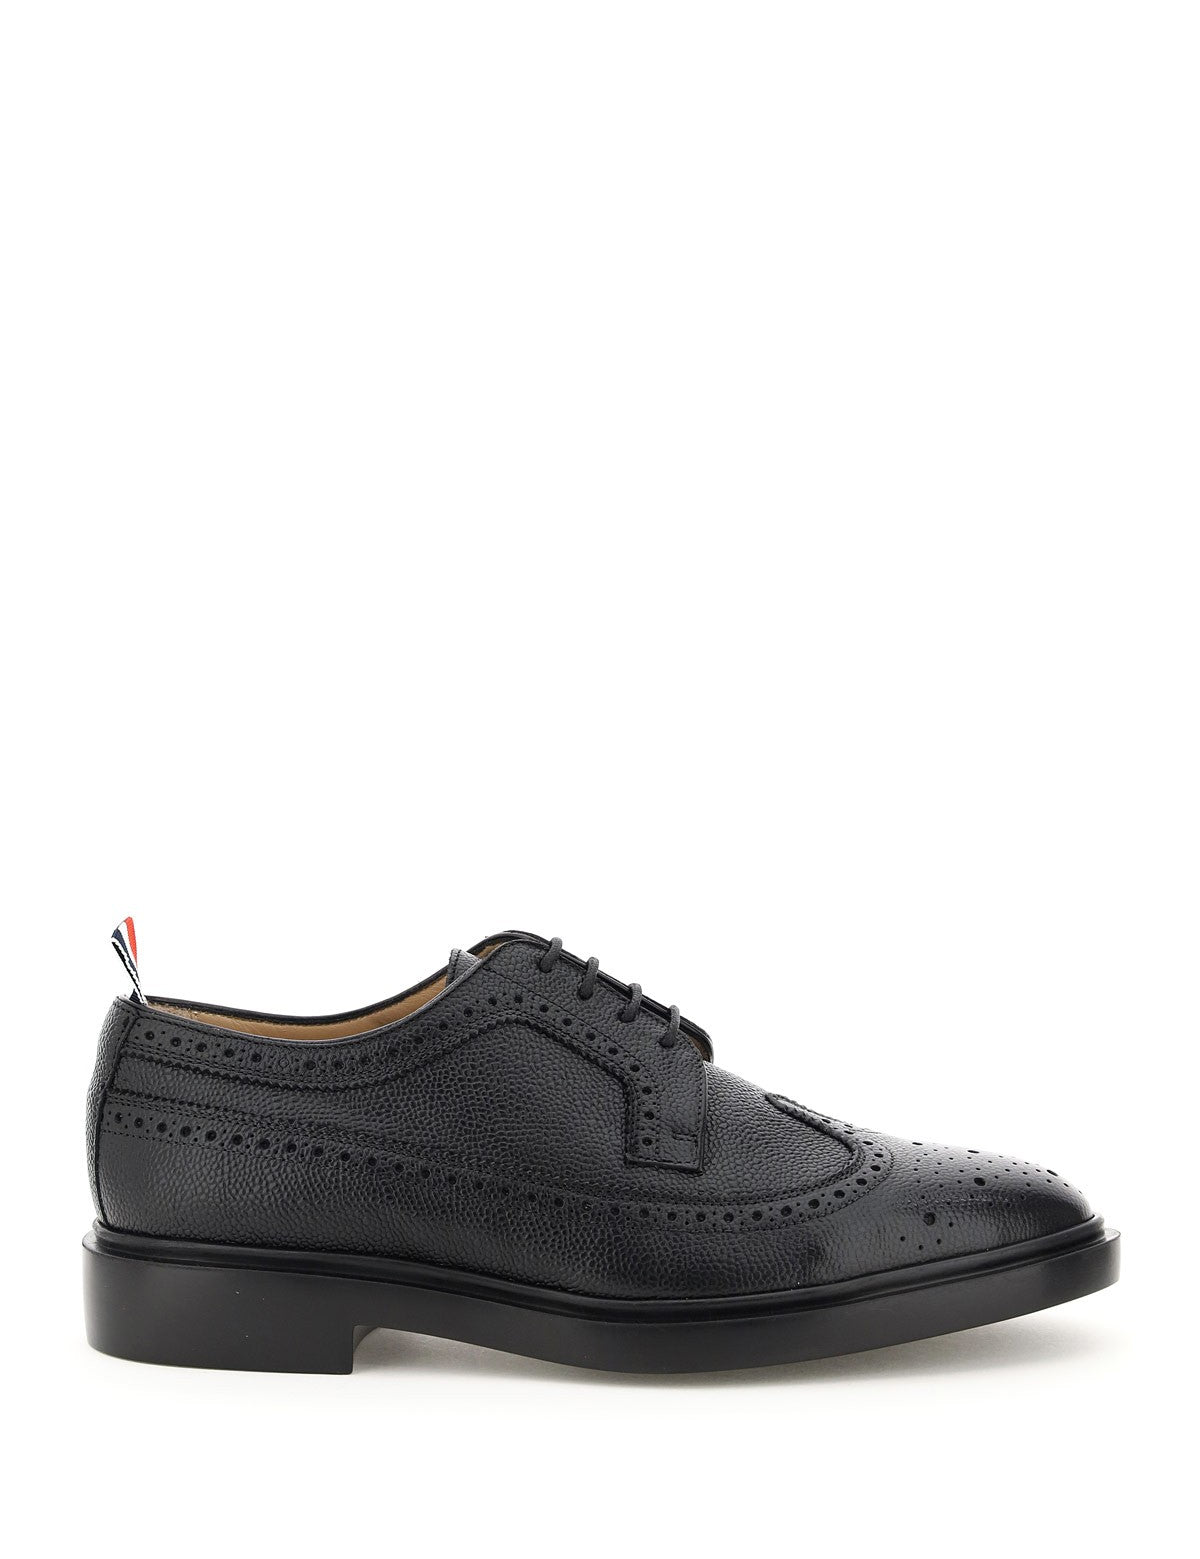 thom-browne-longwing-brogue-lace-up-shoes.jpg